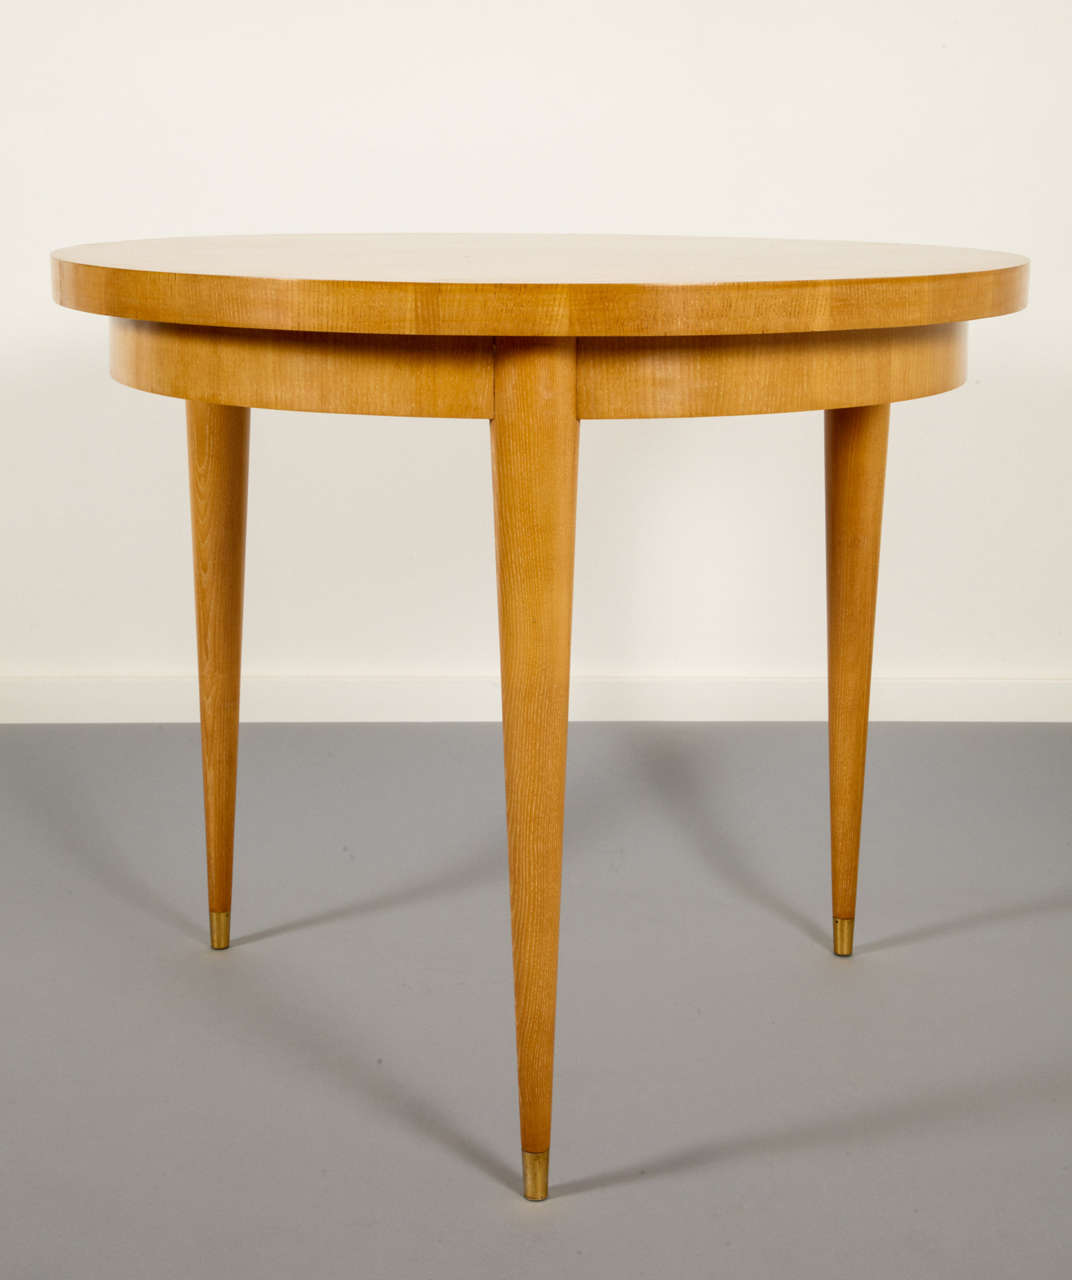 Circular massive oak table by Jean Royere, 1950s.  Regular belt Under top, resting on three conical feet with gilt brass sabots.
Prov. Apartment decorated by Mr Royère.